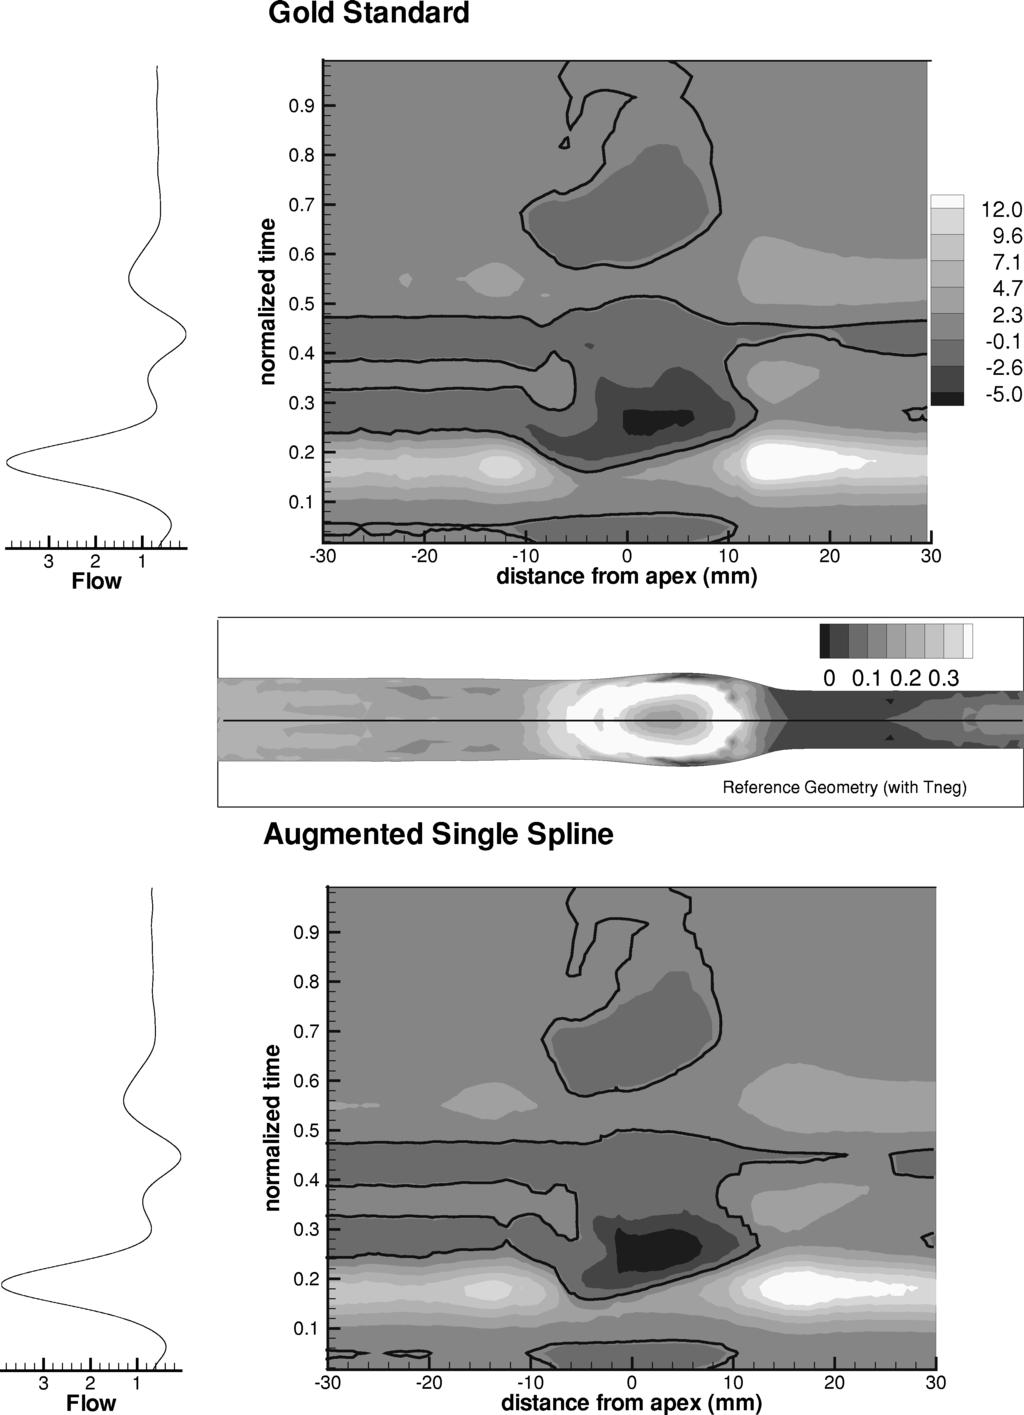 Accuracy of Hemodynamic Modeling 39 FIGURE 6. Variation in normalized wall shear stress magnitude along the lateral centerline of the internal carotid artery sinus under pulsatile flow conditions.